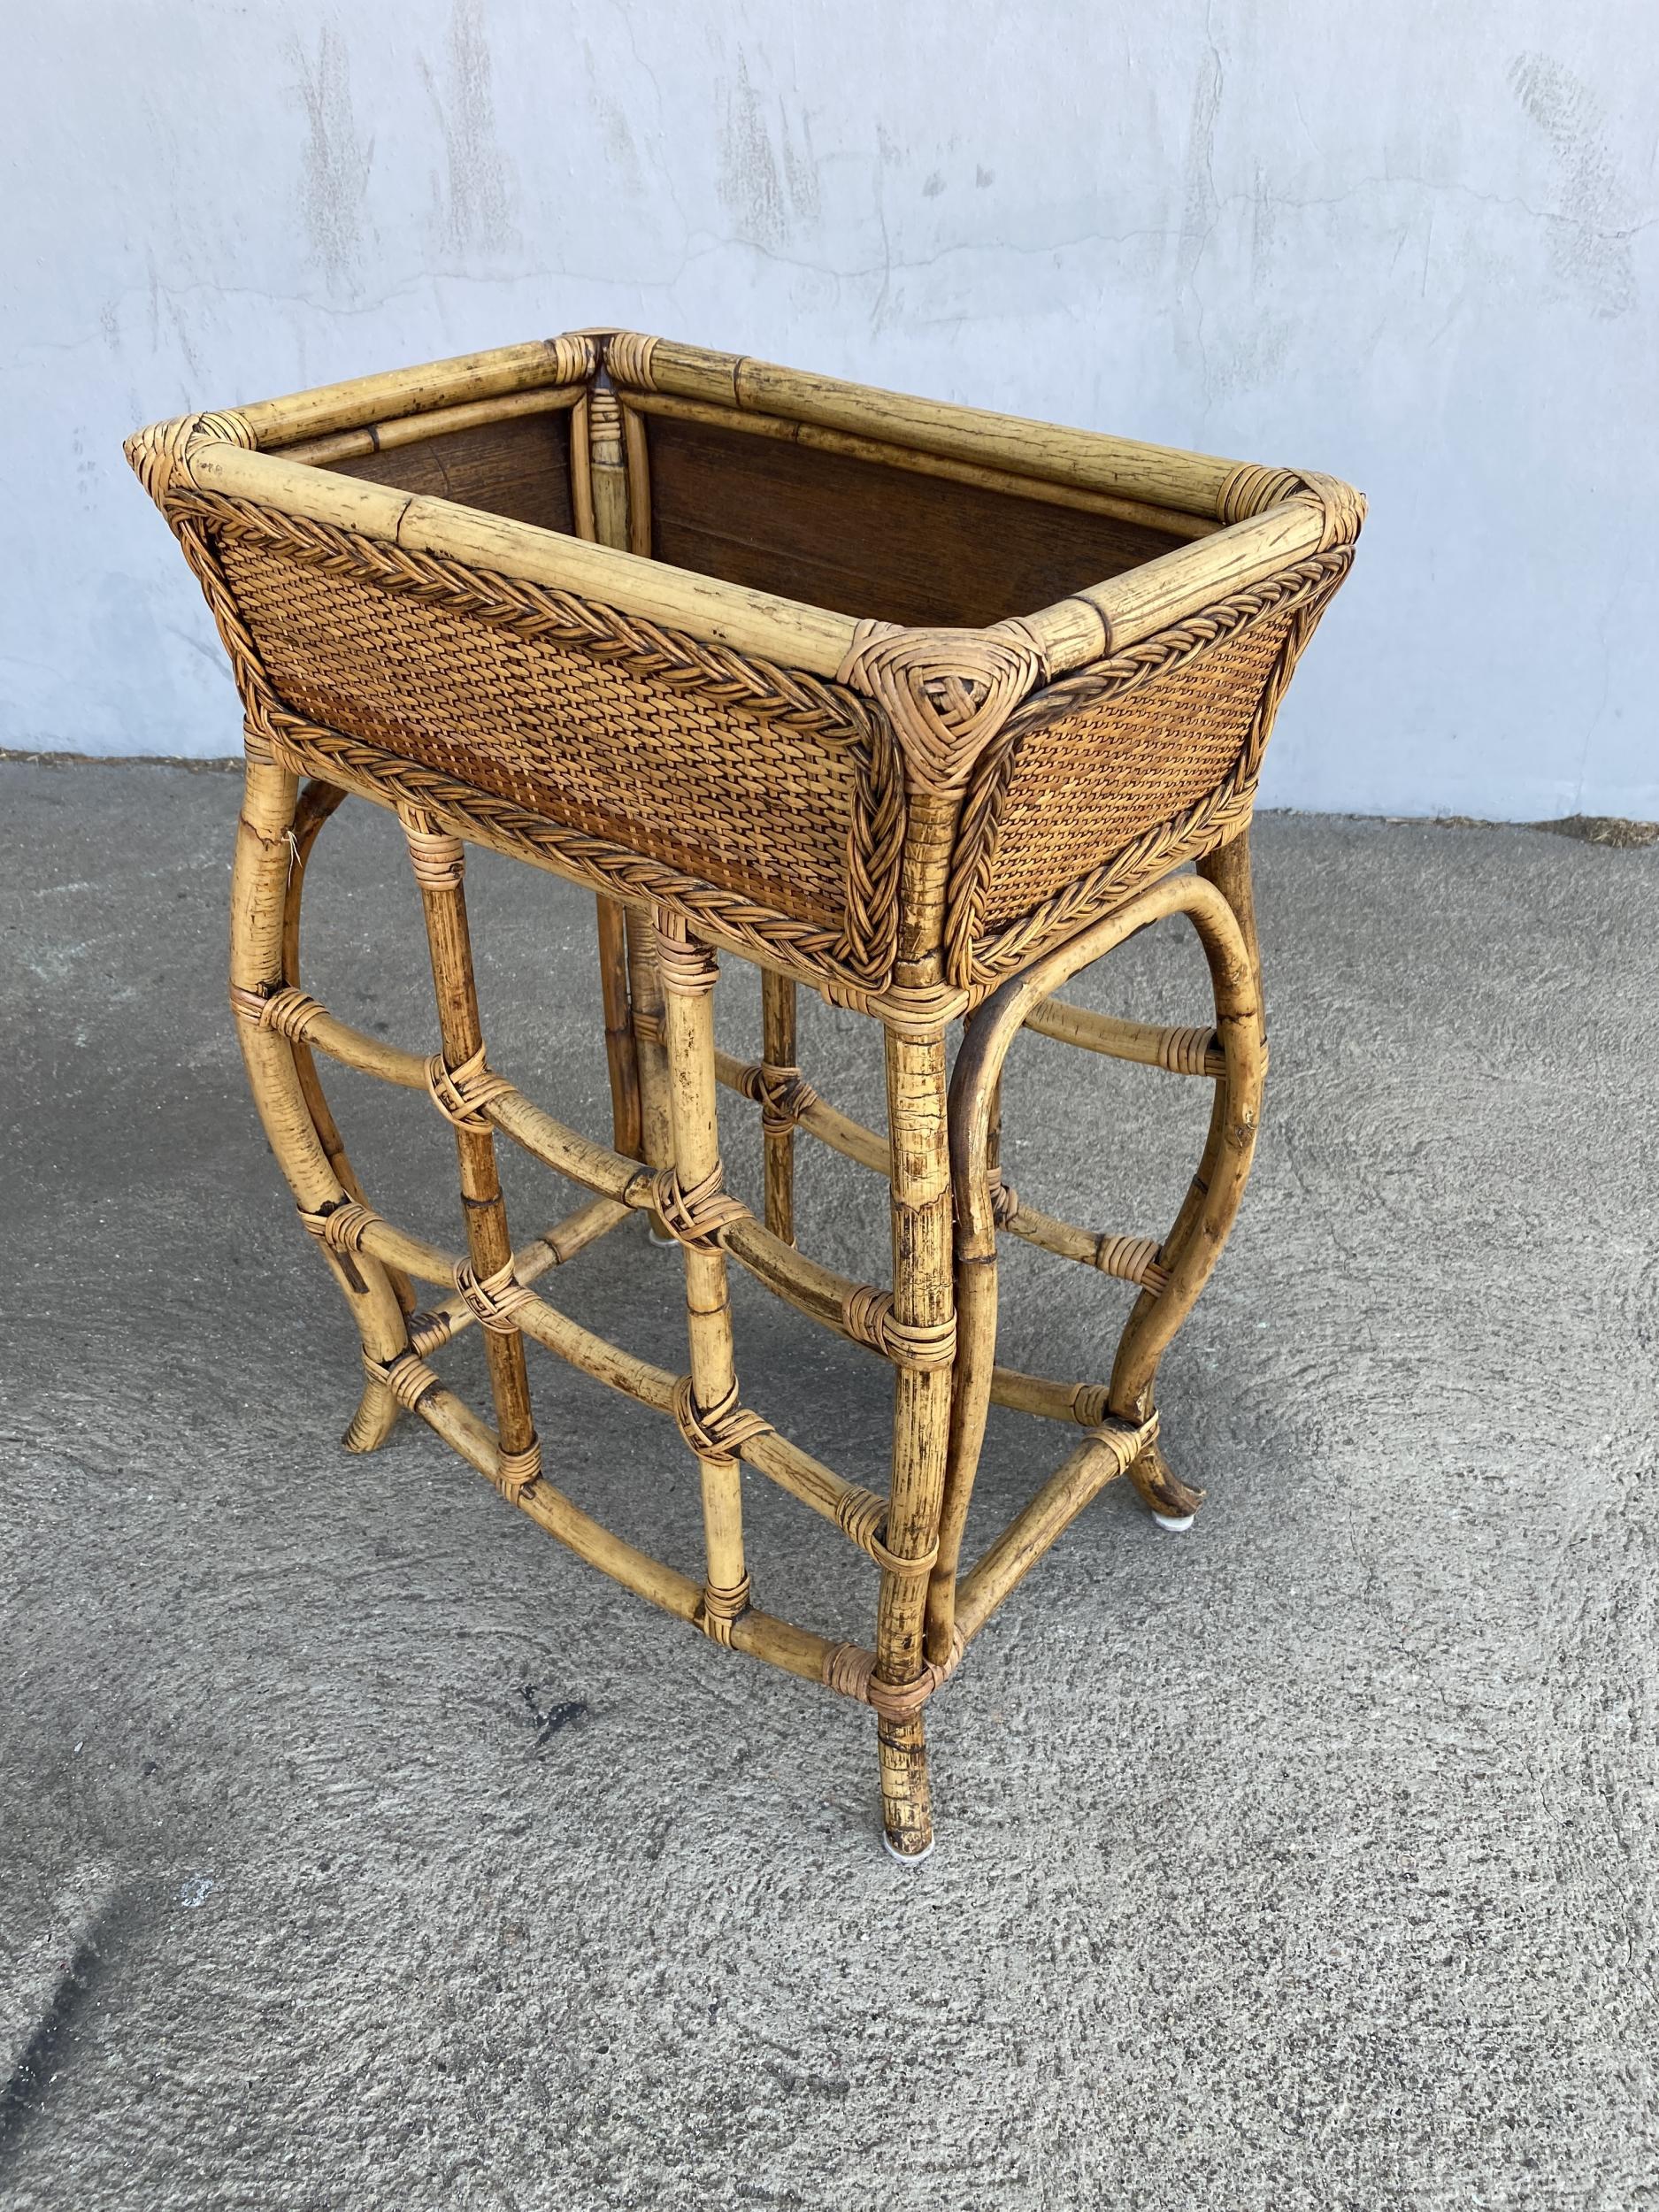 Rattan Restored Bamboo and Wicker Trunk on Stand with Build in Tray